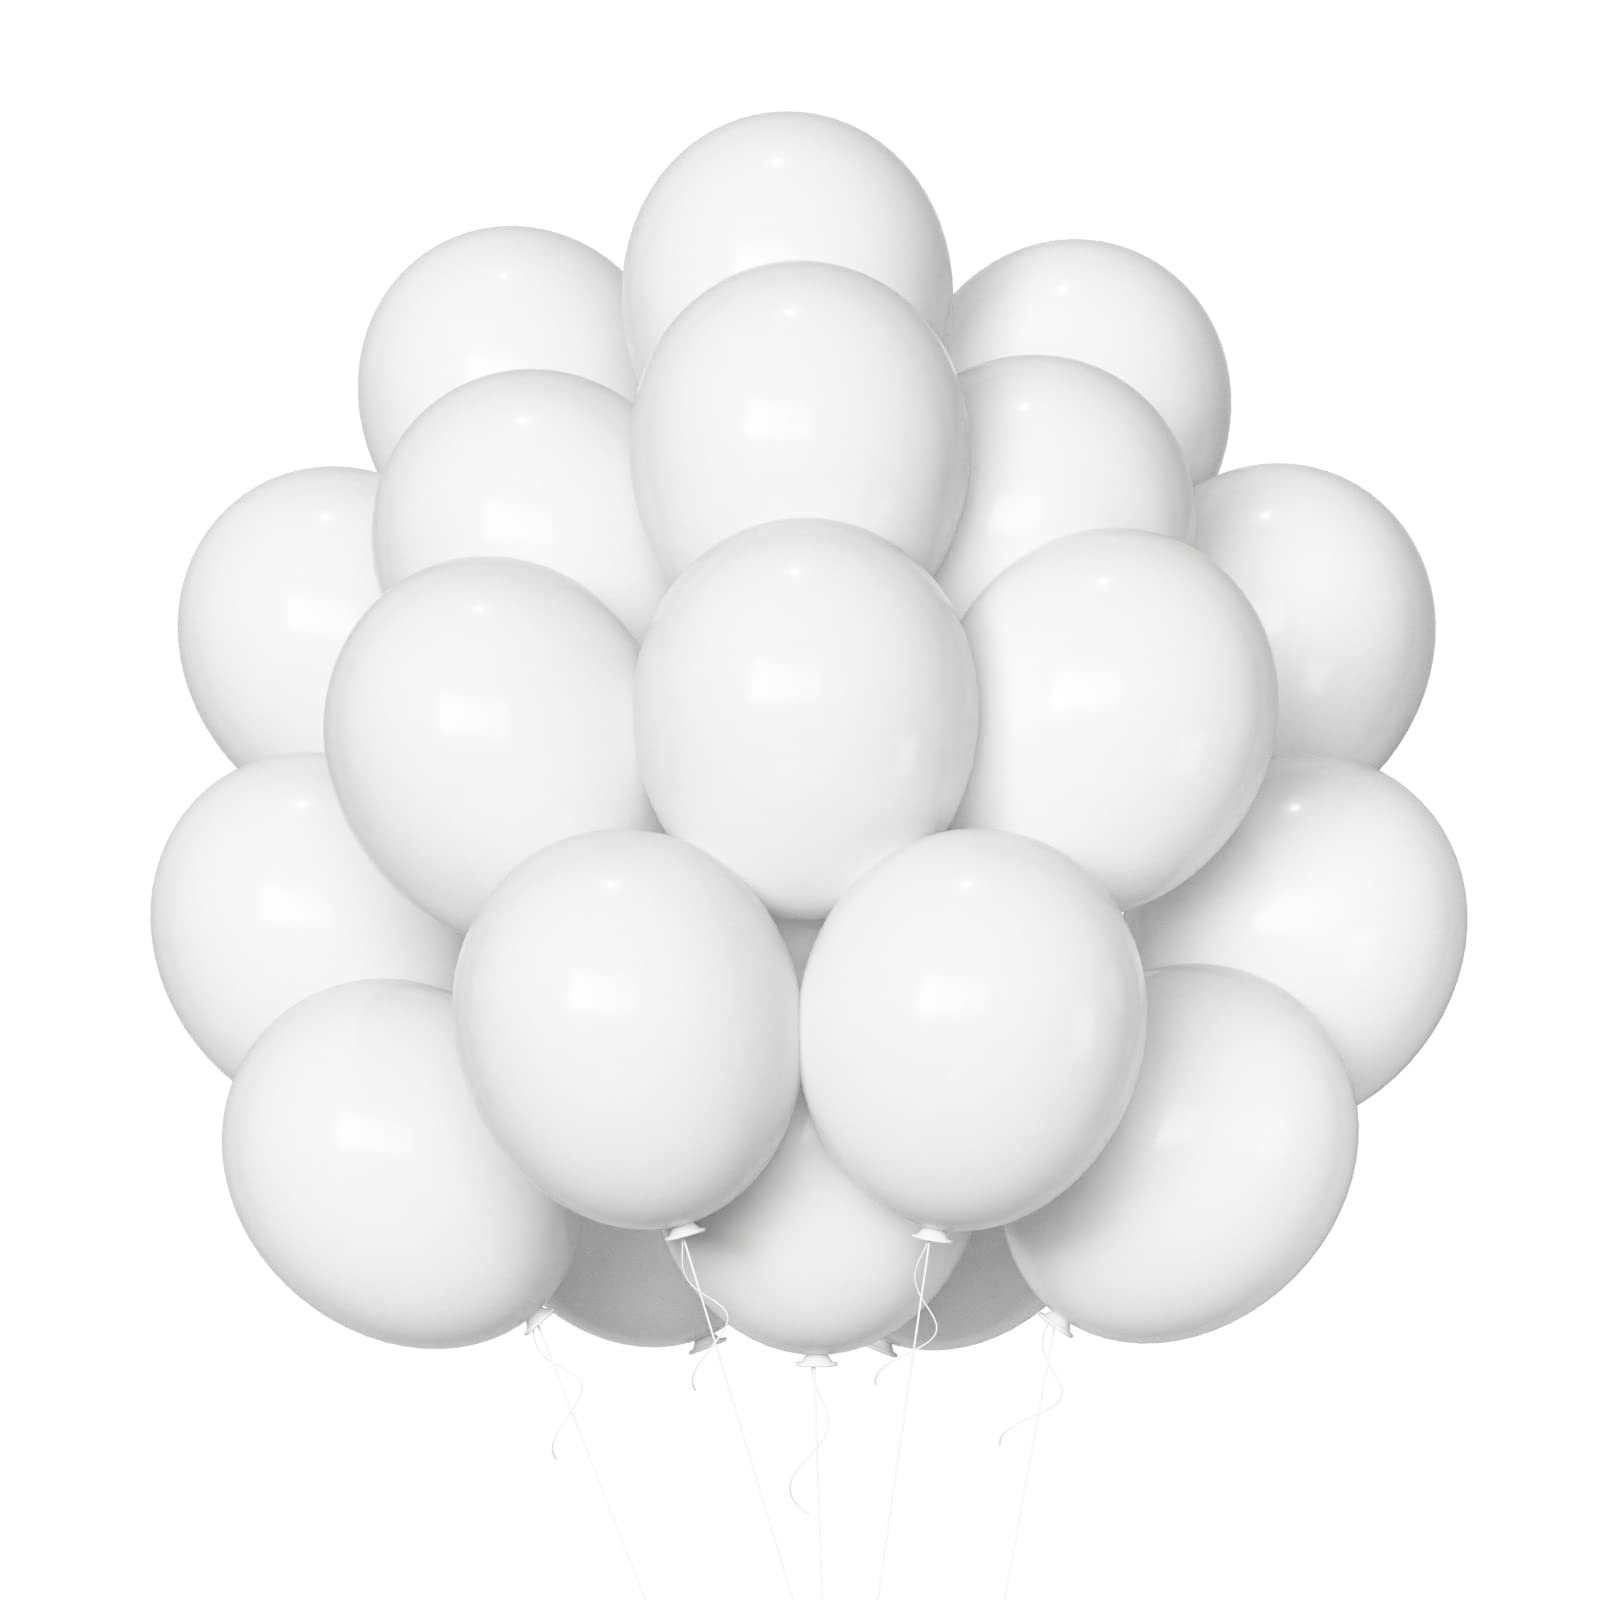 White Balloons Latex Party Balloons - 60 Pack 12 inch White Matte balloons Round Helium Balloons for White Theme Wedding Birthday Party Backdrop Decorations Holiday Celebration Graduation Decorations